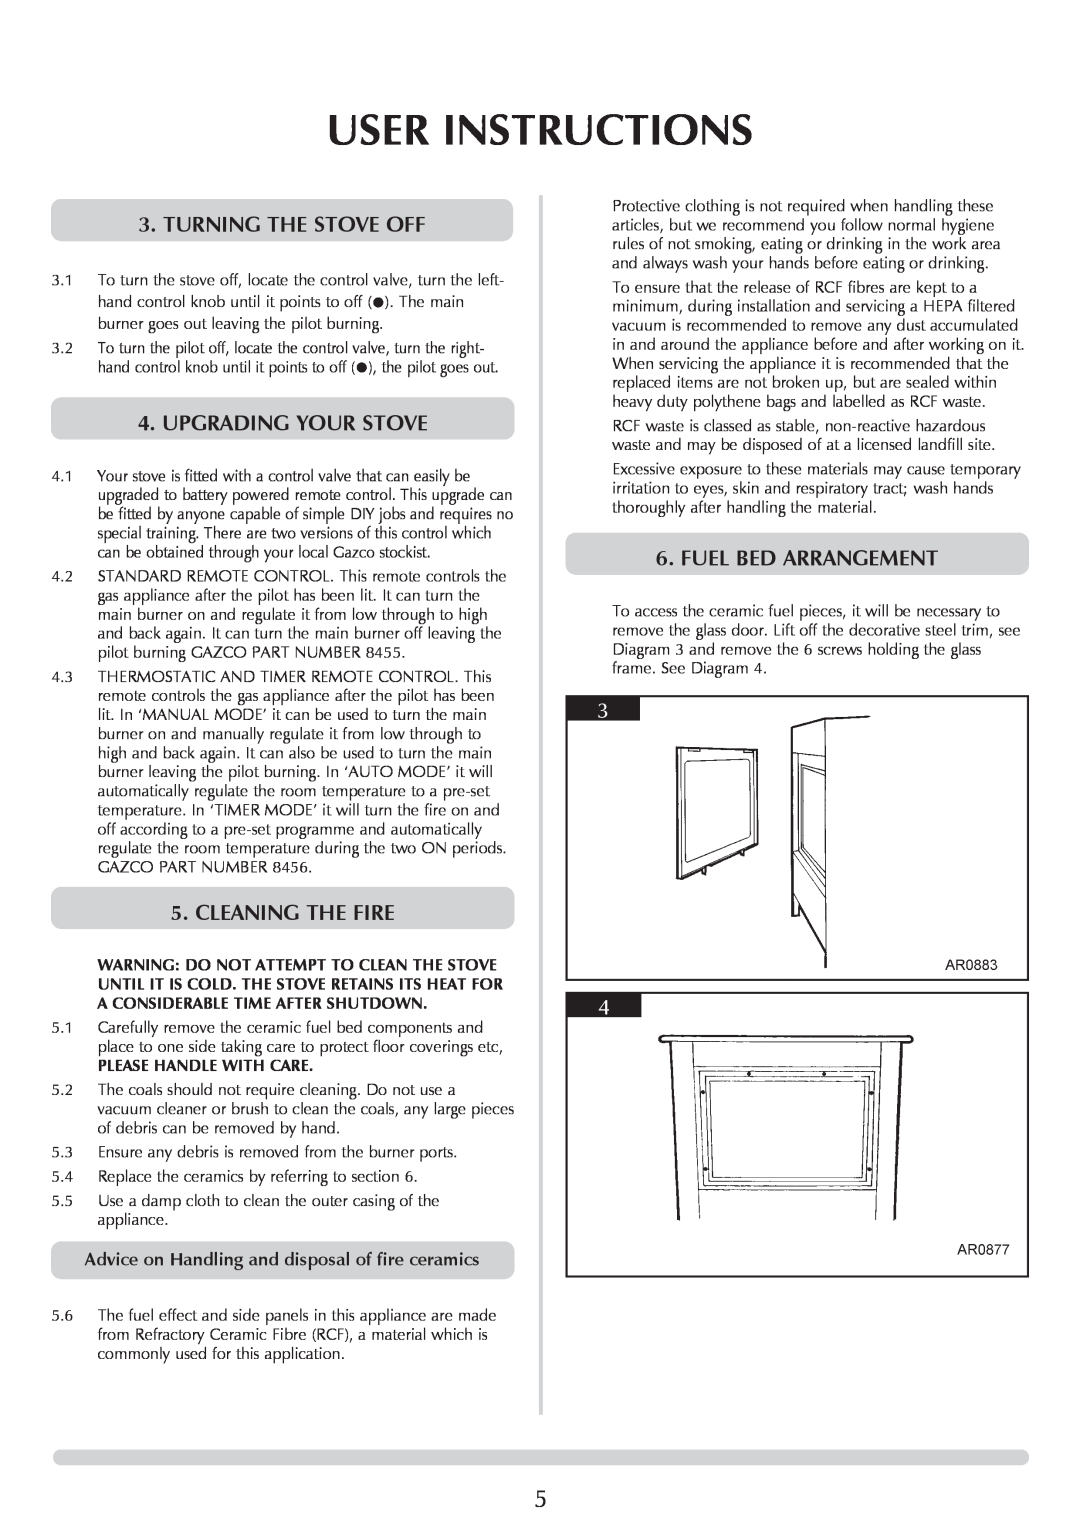 Stovax AR0368 User Instructions, Turning The Stove Off, Upgrading Your Stove, Cleaning The Fire, Fuel Bed Arrangement 